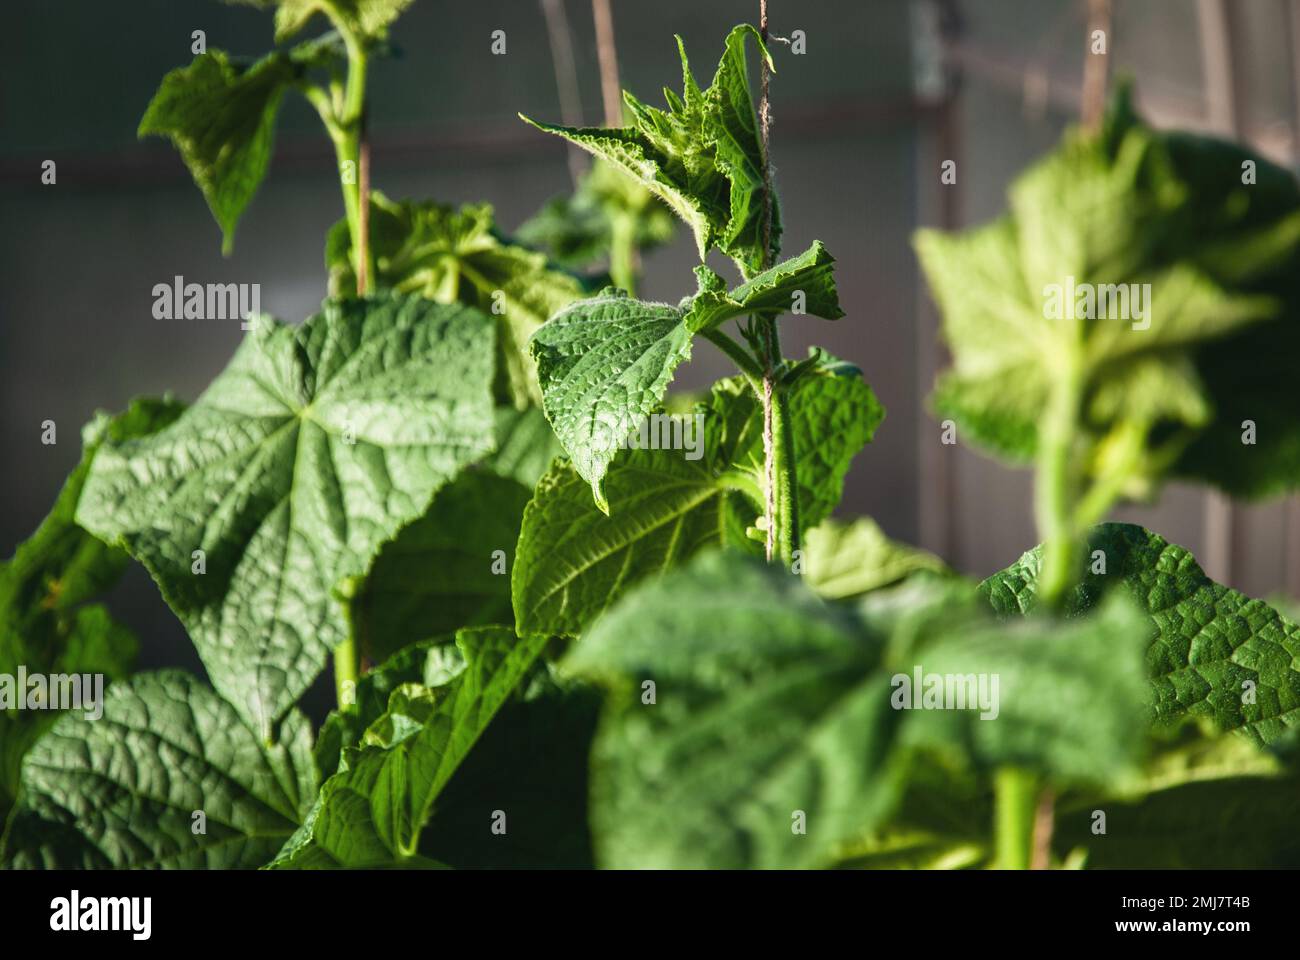 Cucumber plants growing in greenhouse, cucumber vines, plant support string Stock Photo